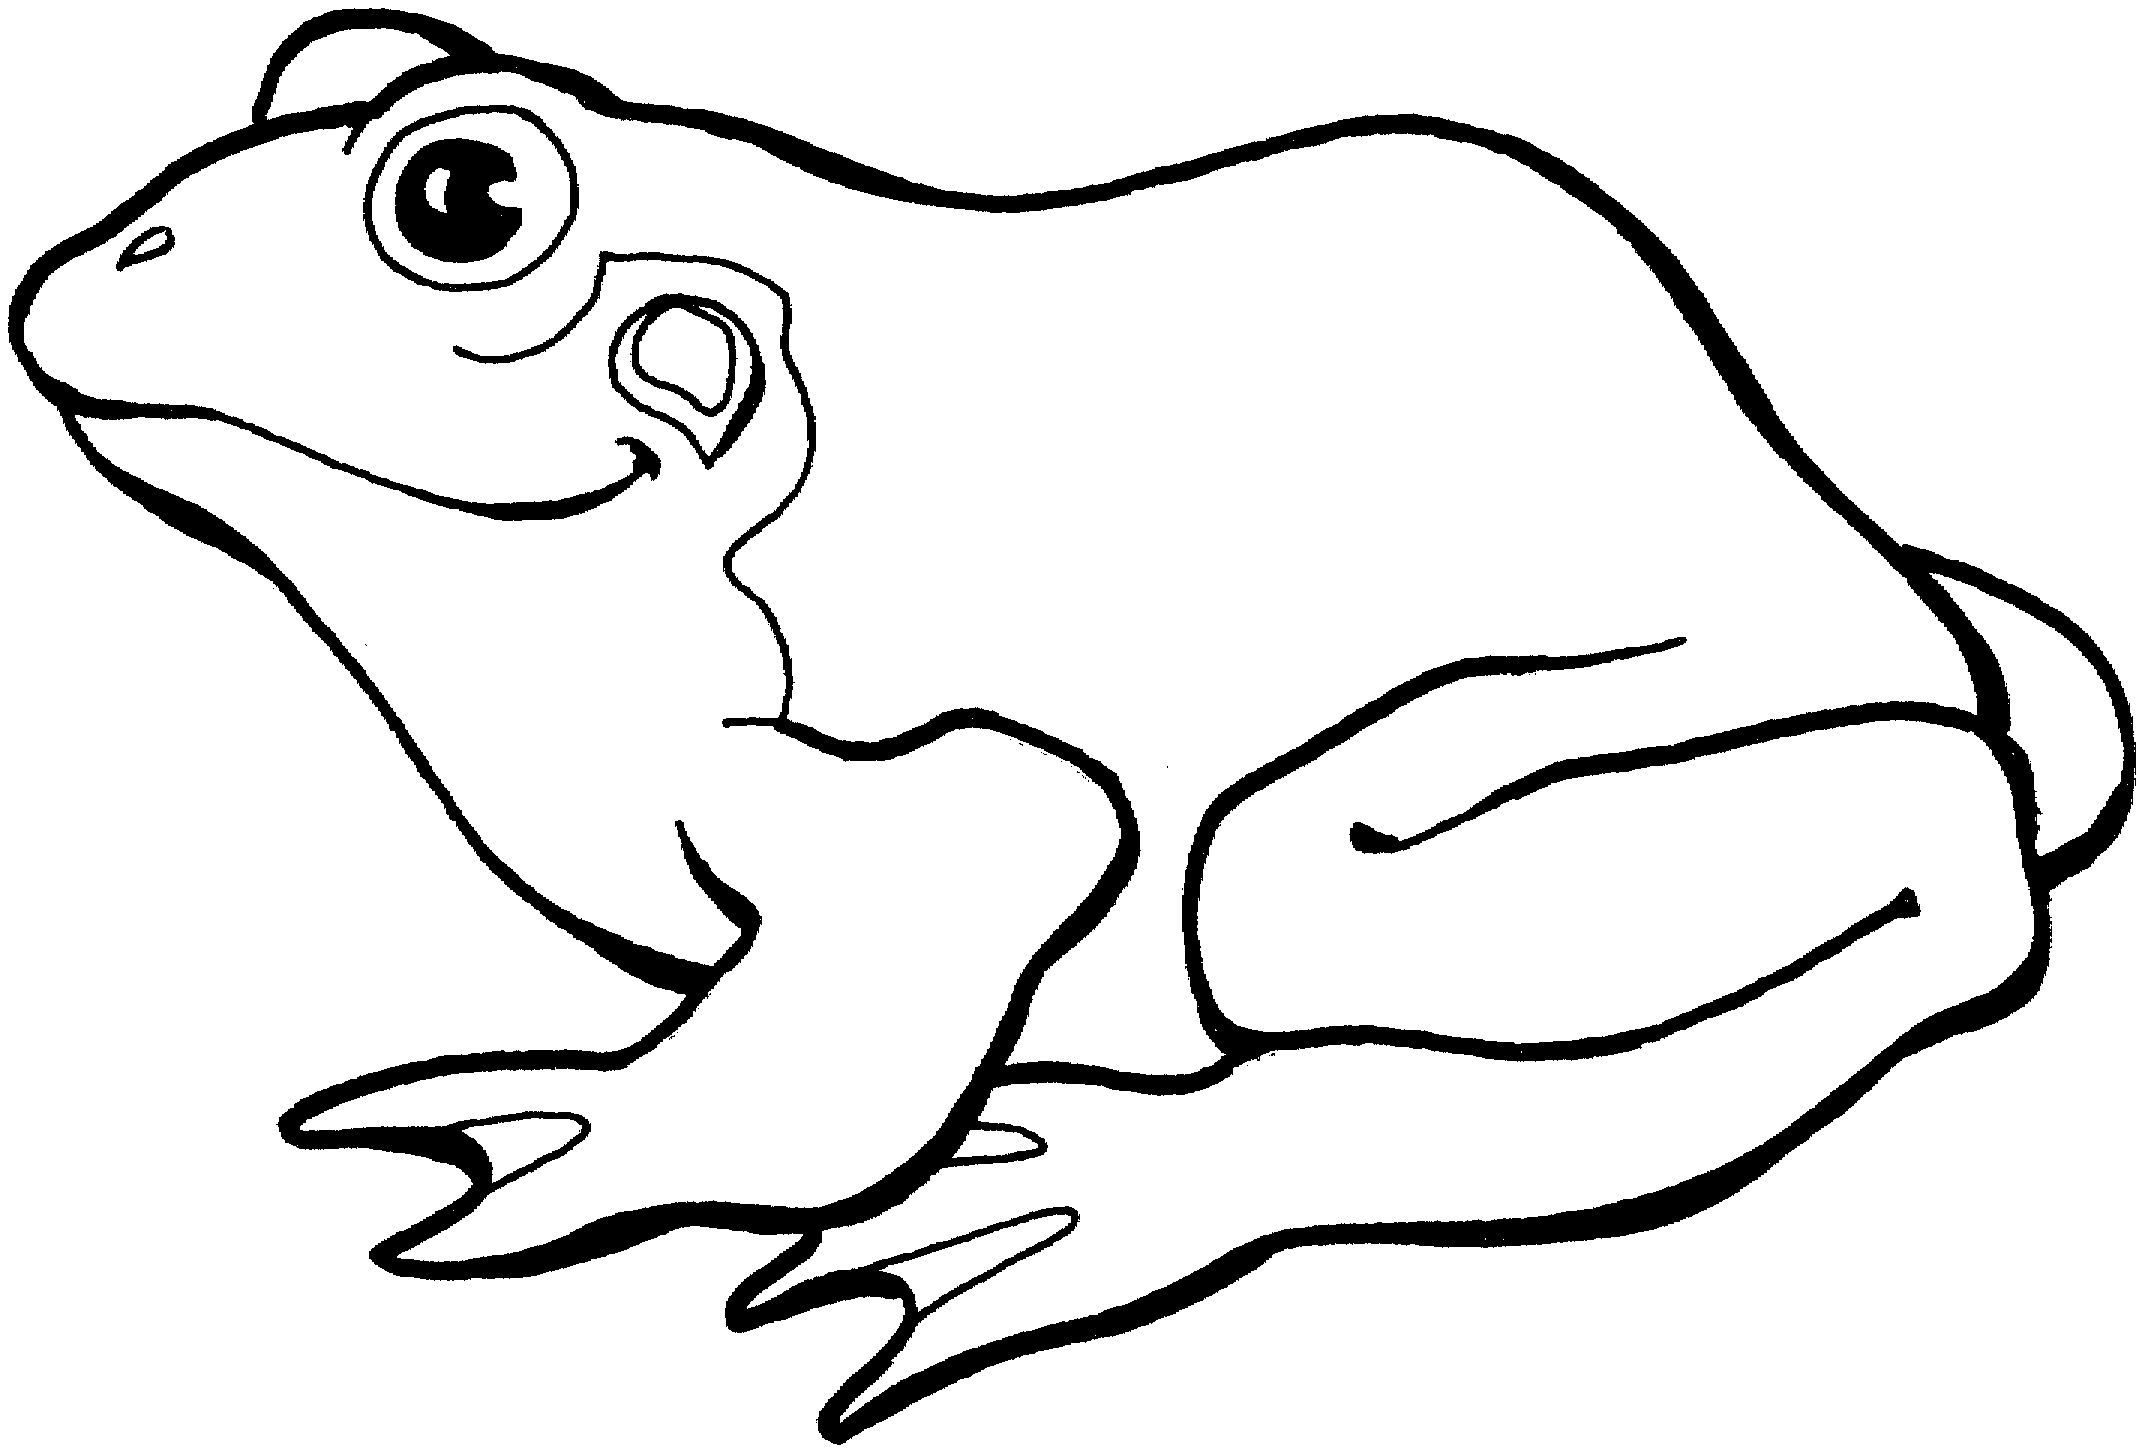 Best Frog Clipart Black And White #13262.